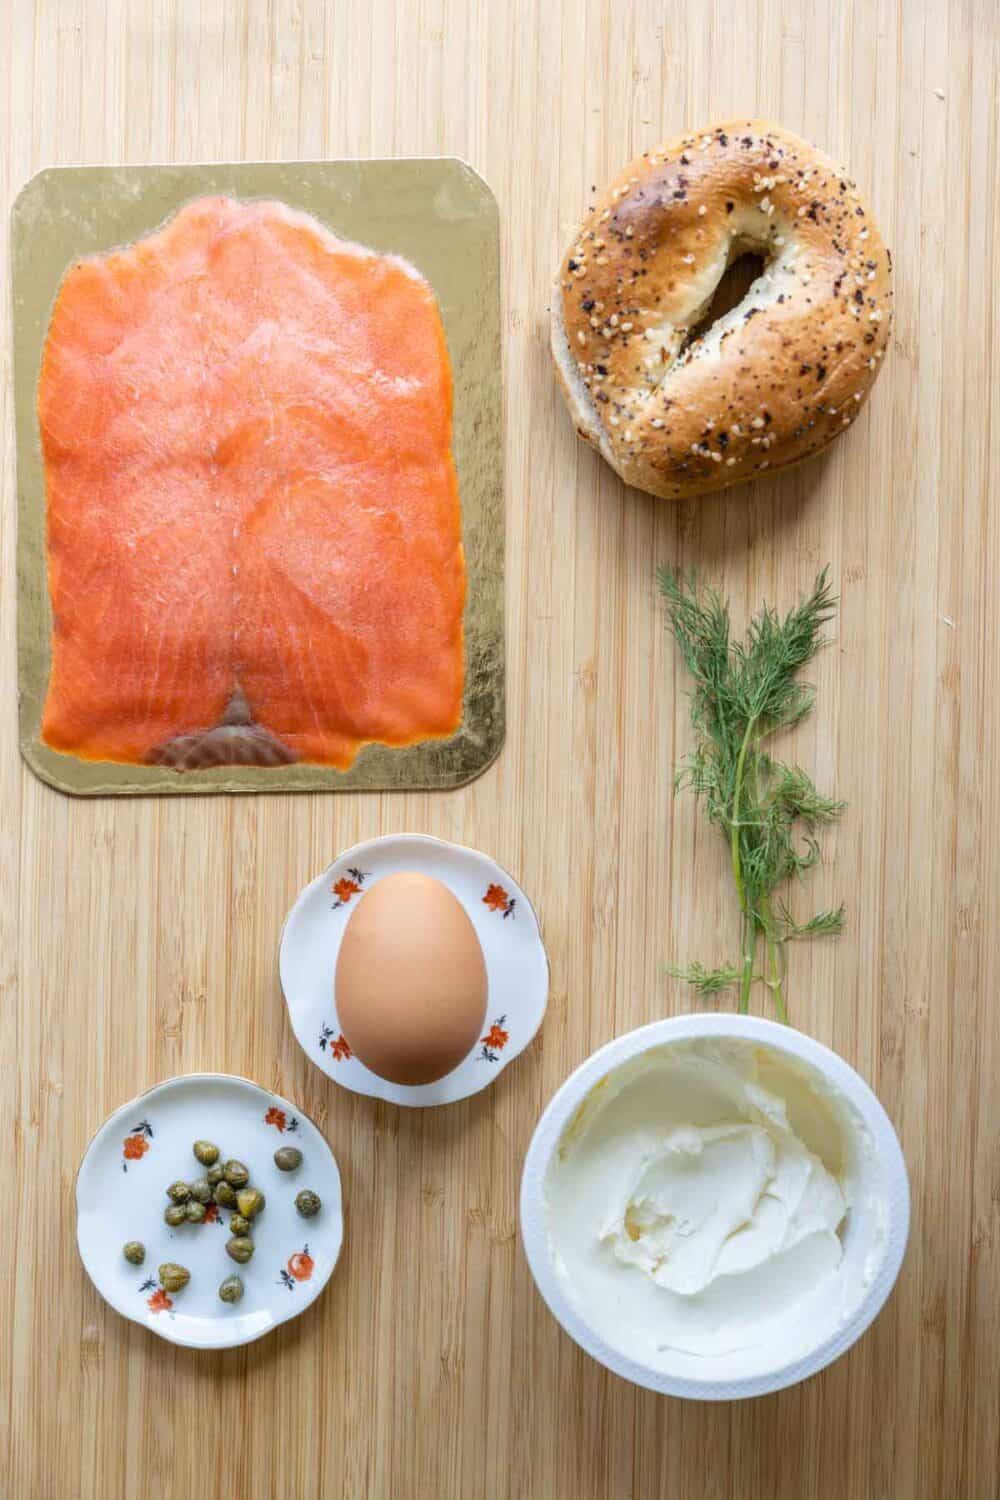 Ingredients for salmon bagel laid out on a kitchen counter.